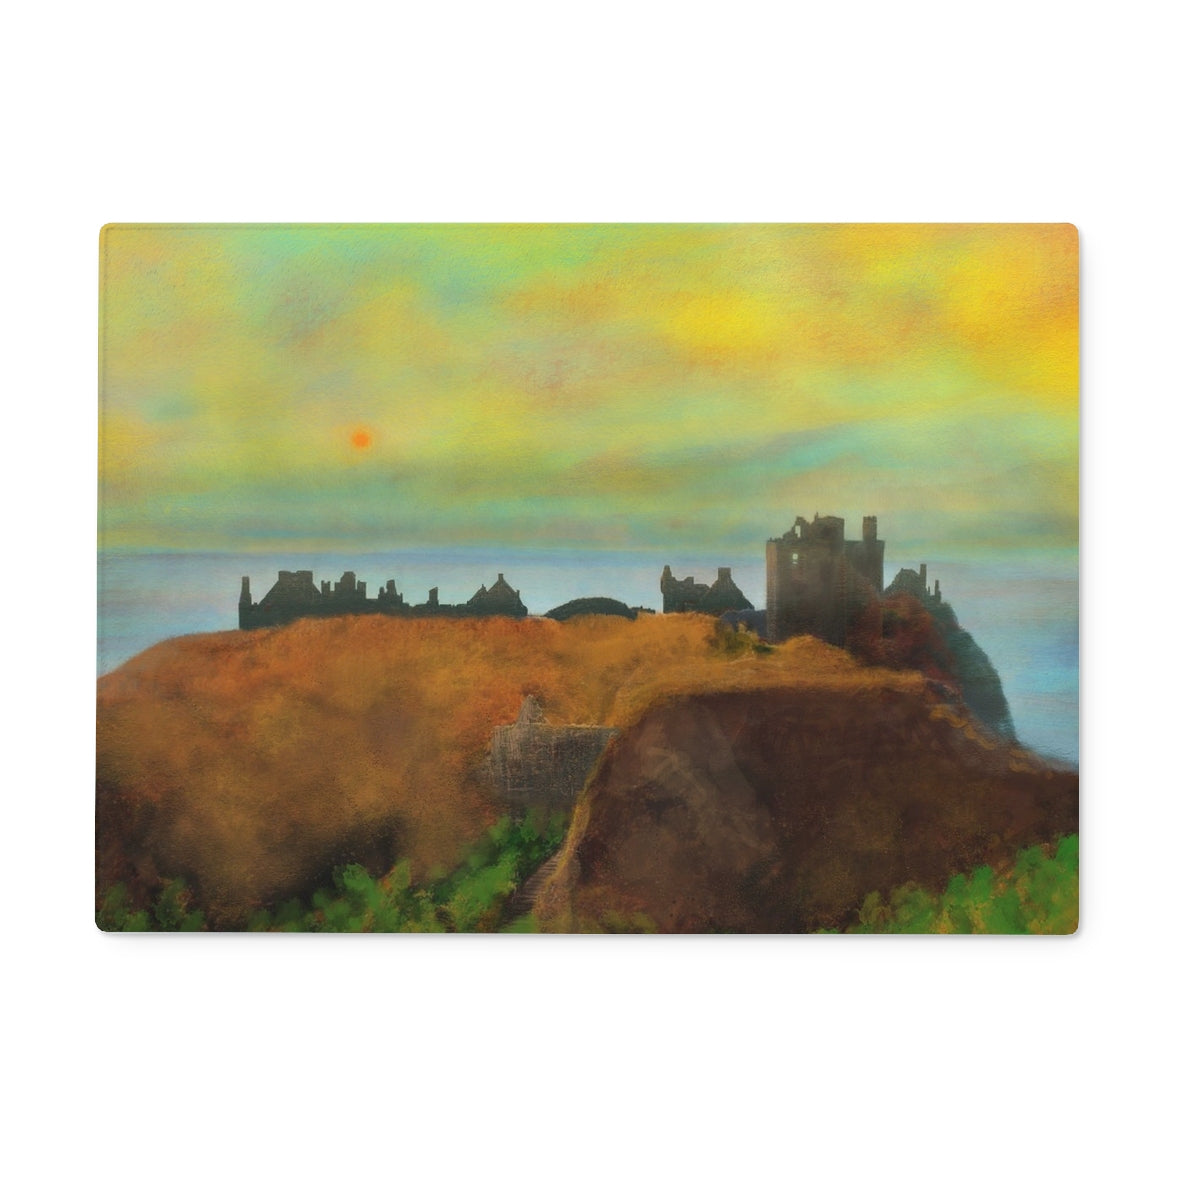 Dunnottar Castle Dusk Art Gifts Glass Chopping Board-Glass Chopping Boards-Historic & Iconic Scotland Art Gallery-15"x11" Rectangular-Paintings, Prints, Homeware, Art Gifts From Scotland By Scottish Artist Kevin Hunter